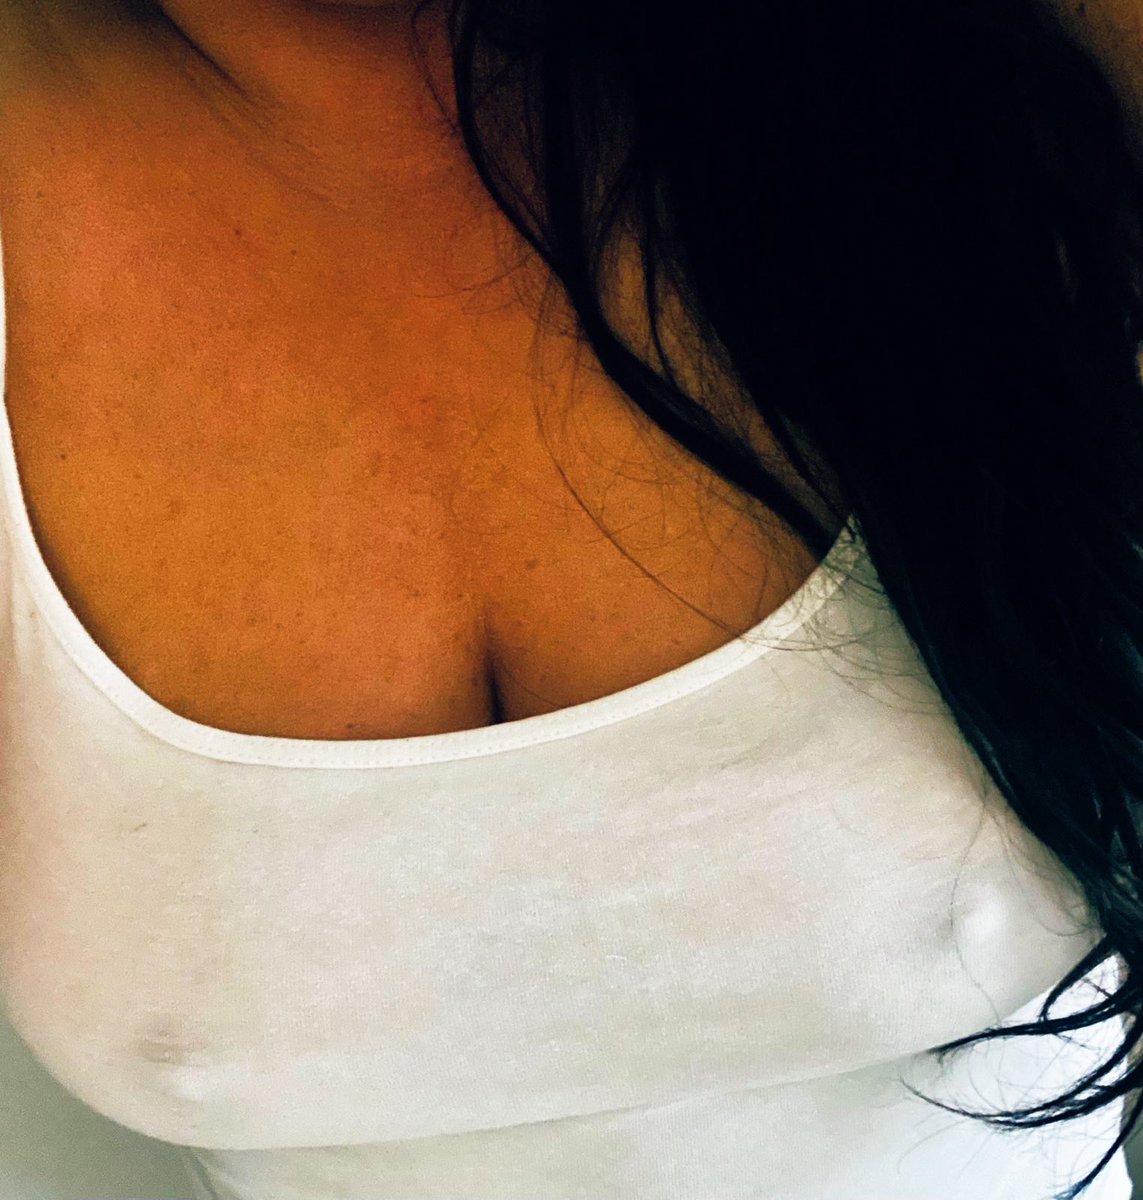 Well, I don't know if it doesn't help me too… no bra Wednesday, I really give up 😅 Visibility is zerooooo 😤 UPDATE! COLLECTED:525 Eur DONATE: PayPal.me/Edythas GOAL: 6000 Eur Thank you so much for helping me 🙏😘 Everyone helps a big time - retweet, boost and donate!